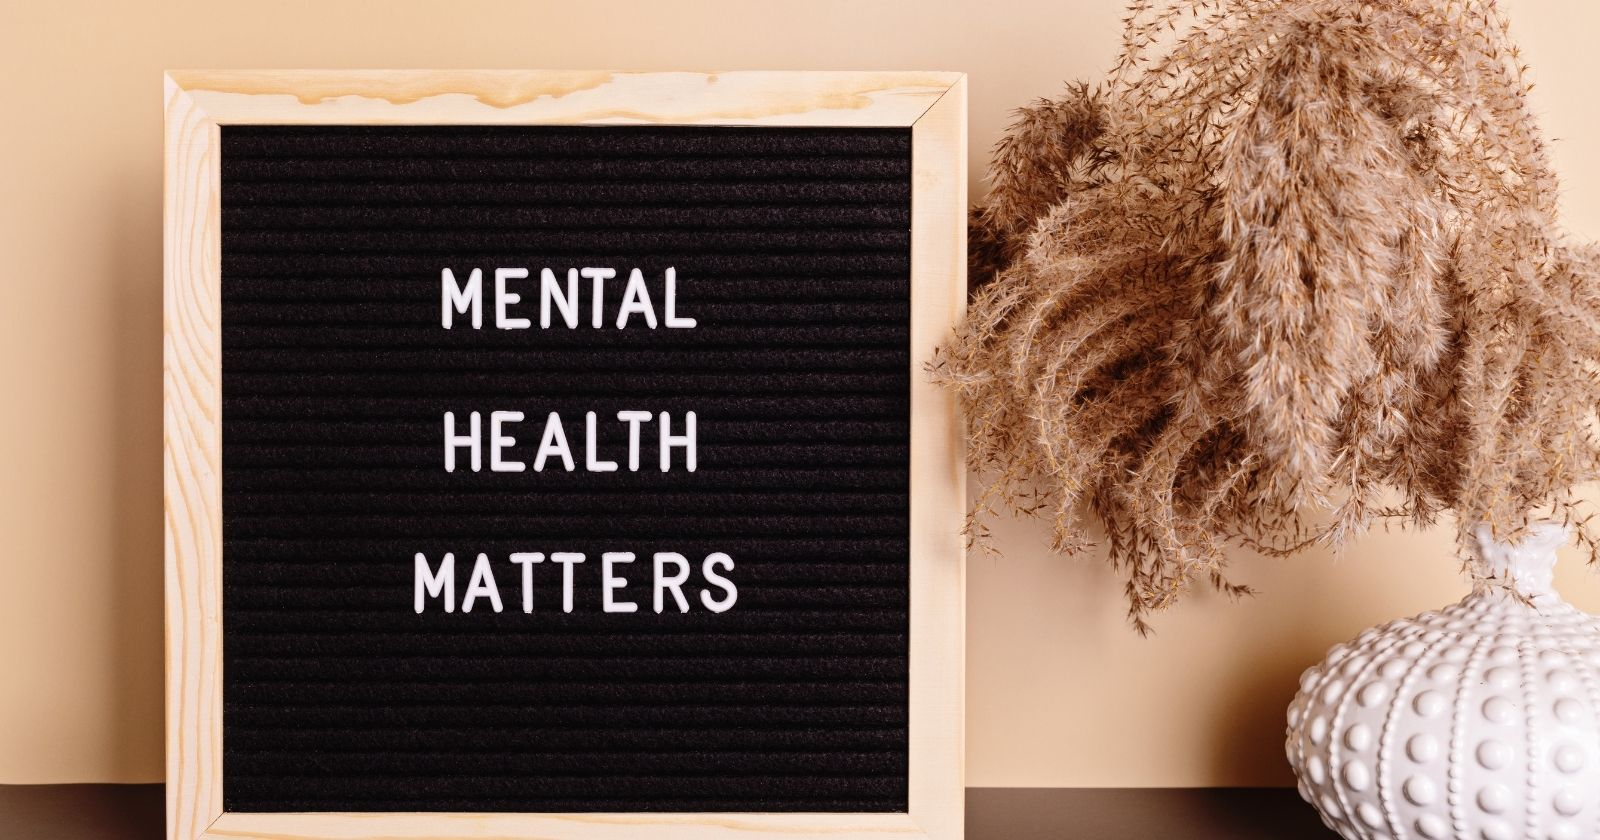 Mental Health and Addiction
Table piece and black board with a text "Mental Health Matters"